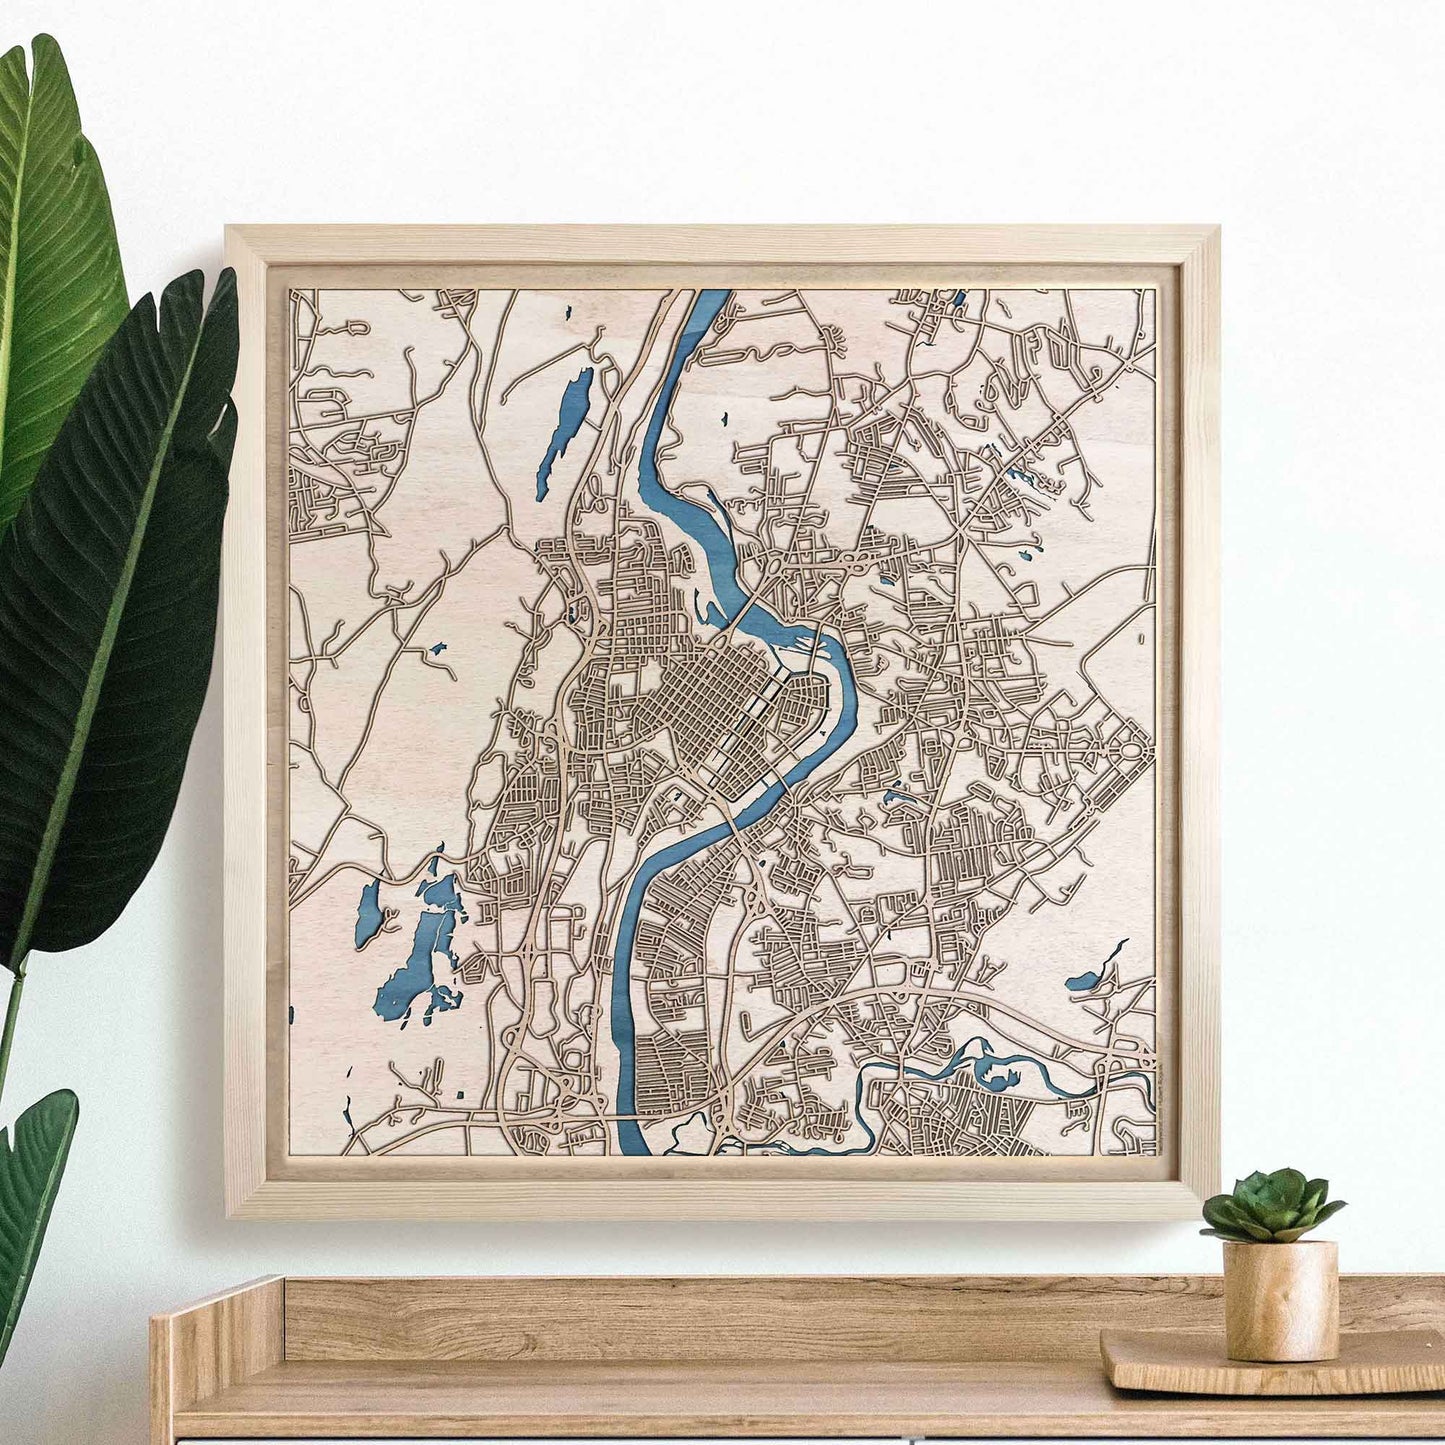 Holyoke Wooden Map by CityWood - Custom Wood Map Art - Unique Laser Cut Engraved - Anniversary Gift